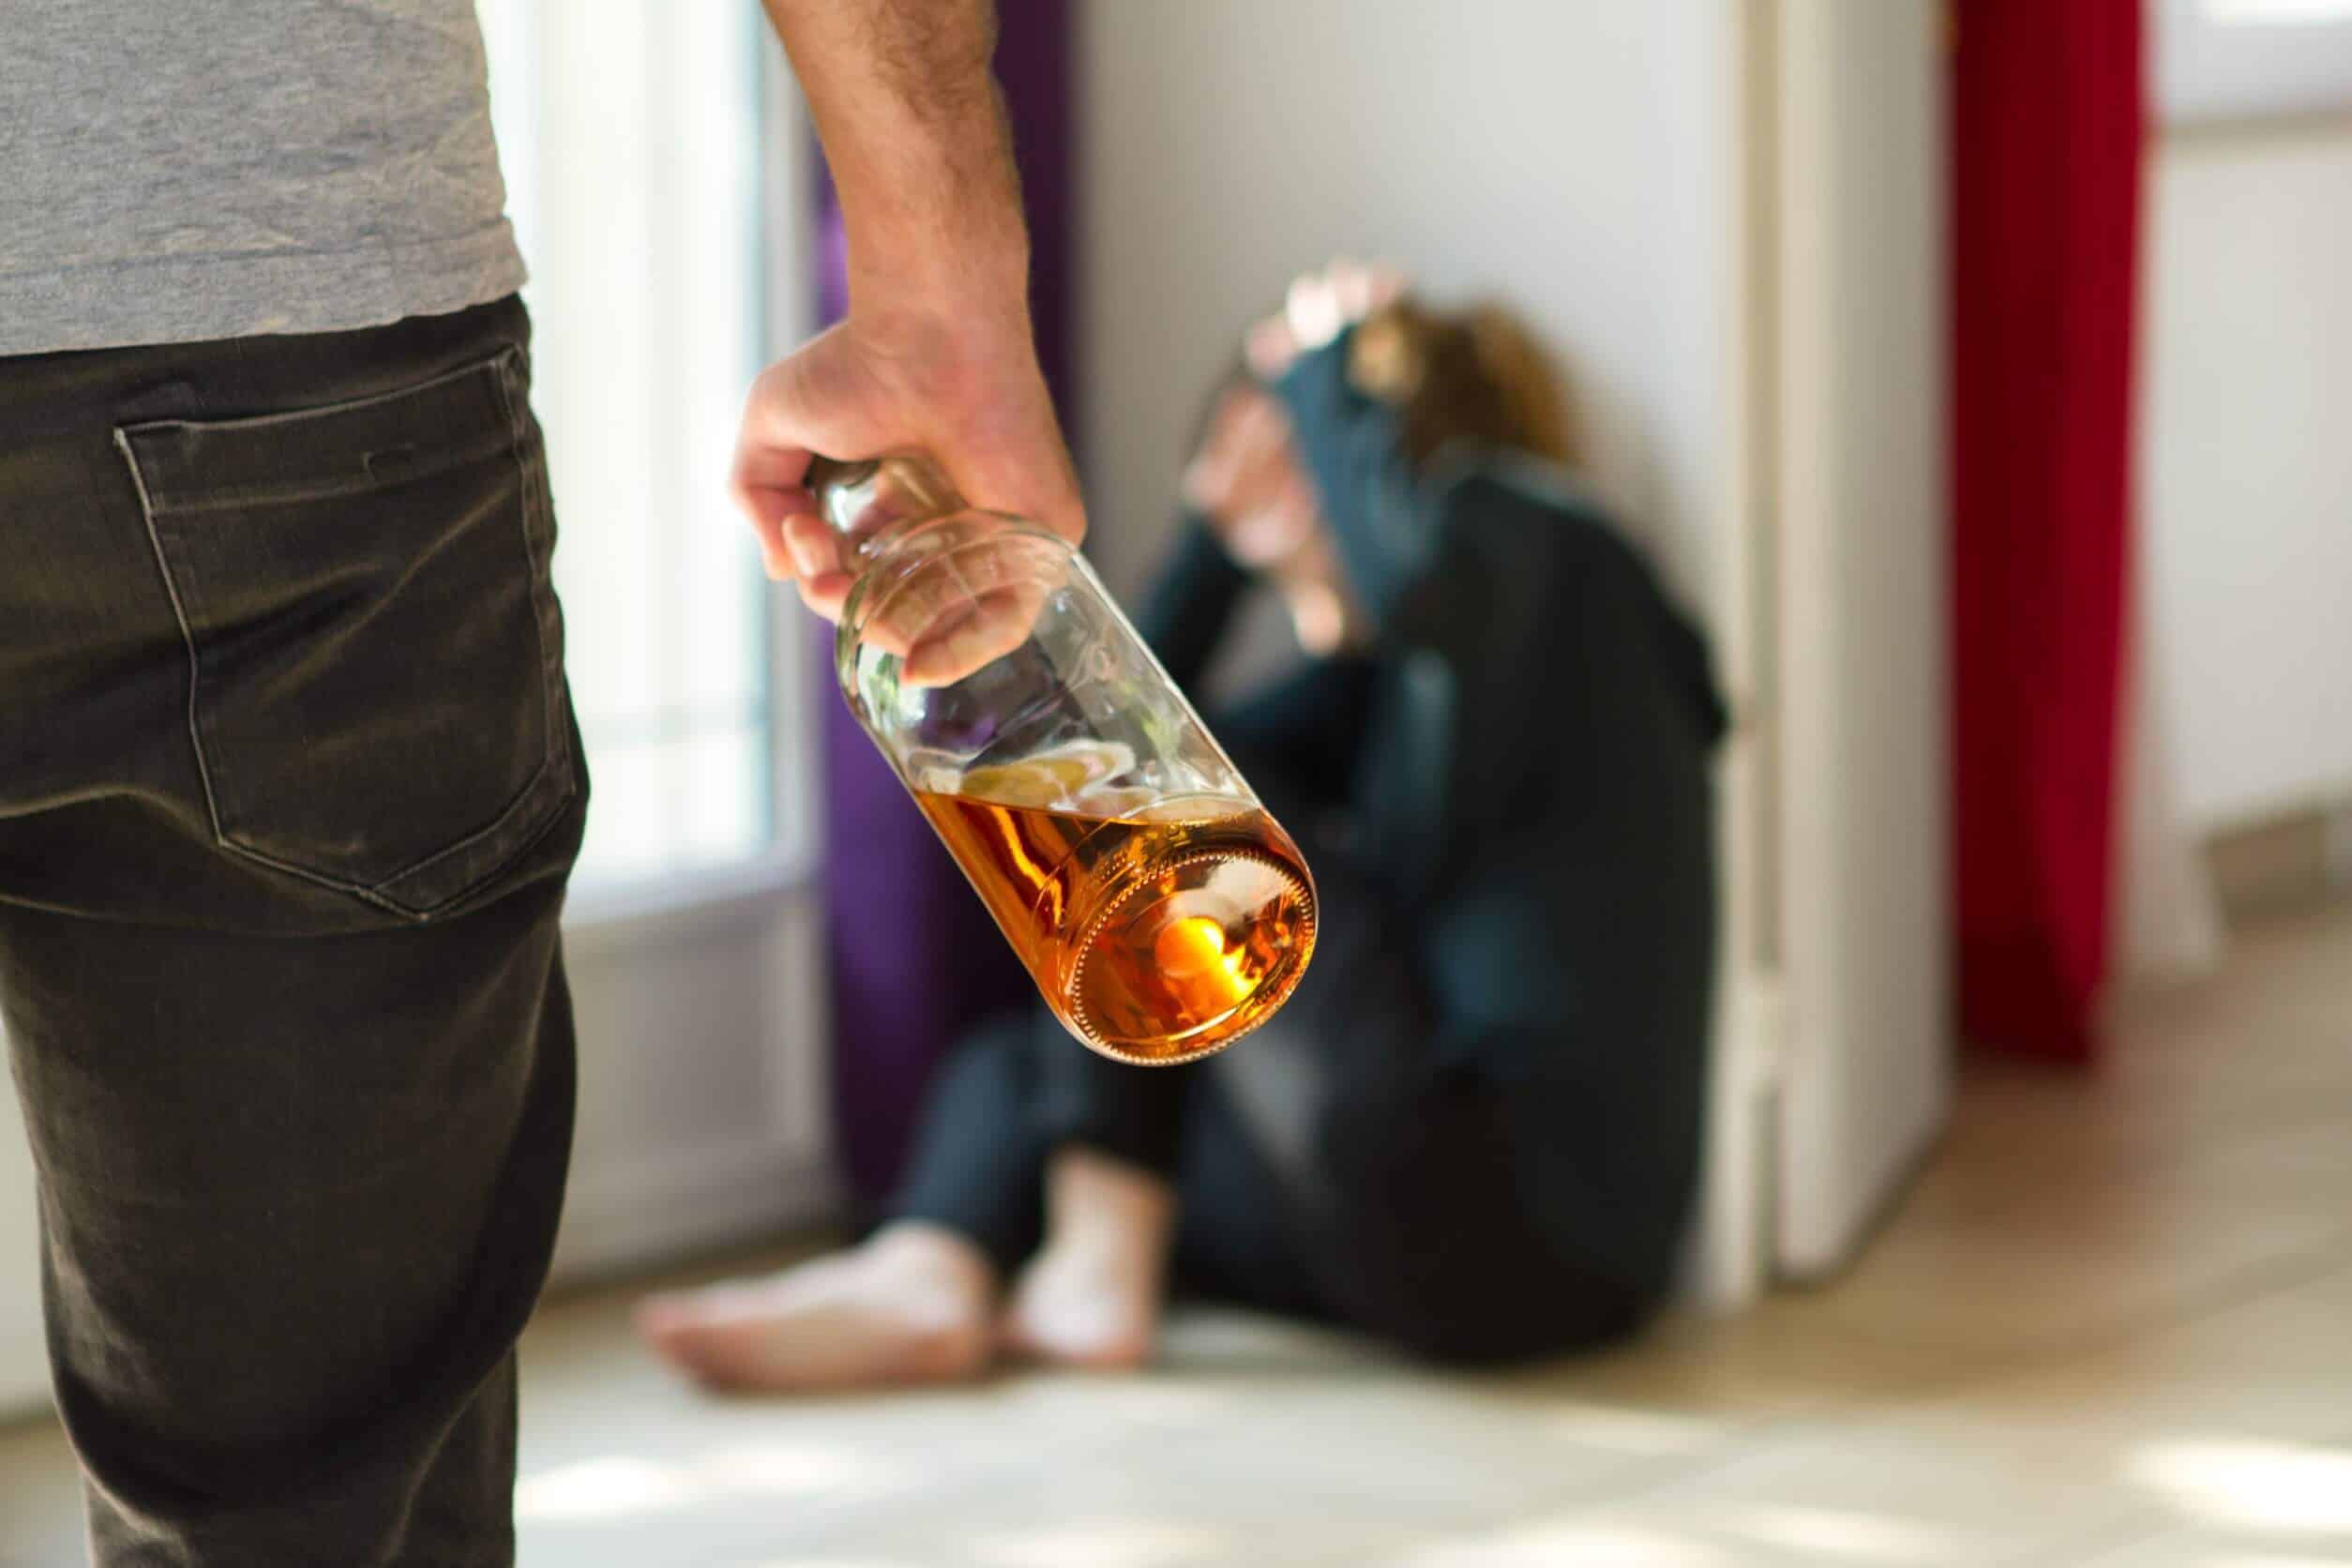 Alcohol Abuse Often Leads to Violent Crimes